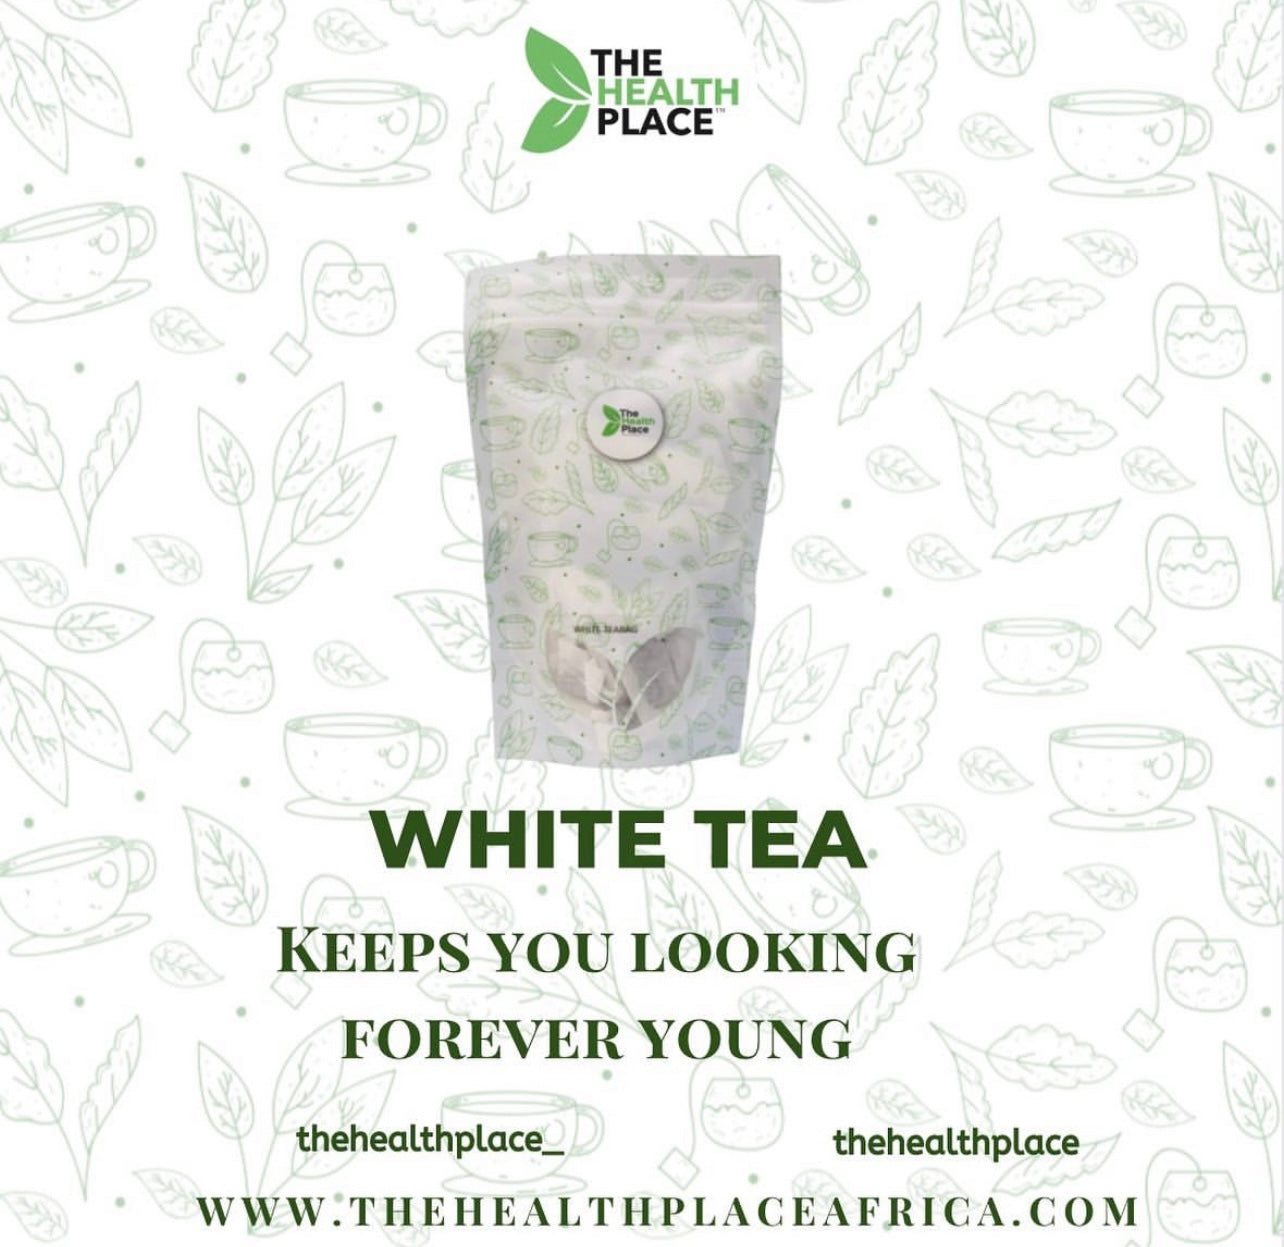 WHITE TEA- KEEPS YOU LOOKING FOREVER YOUNG